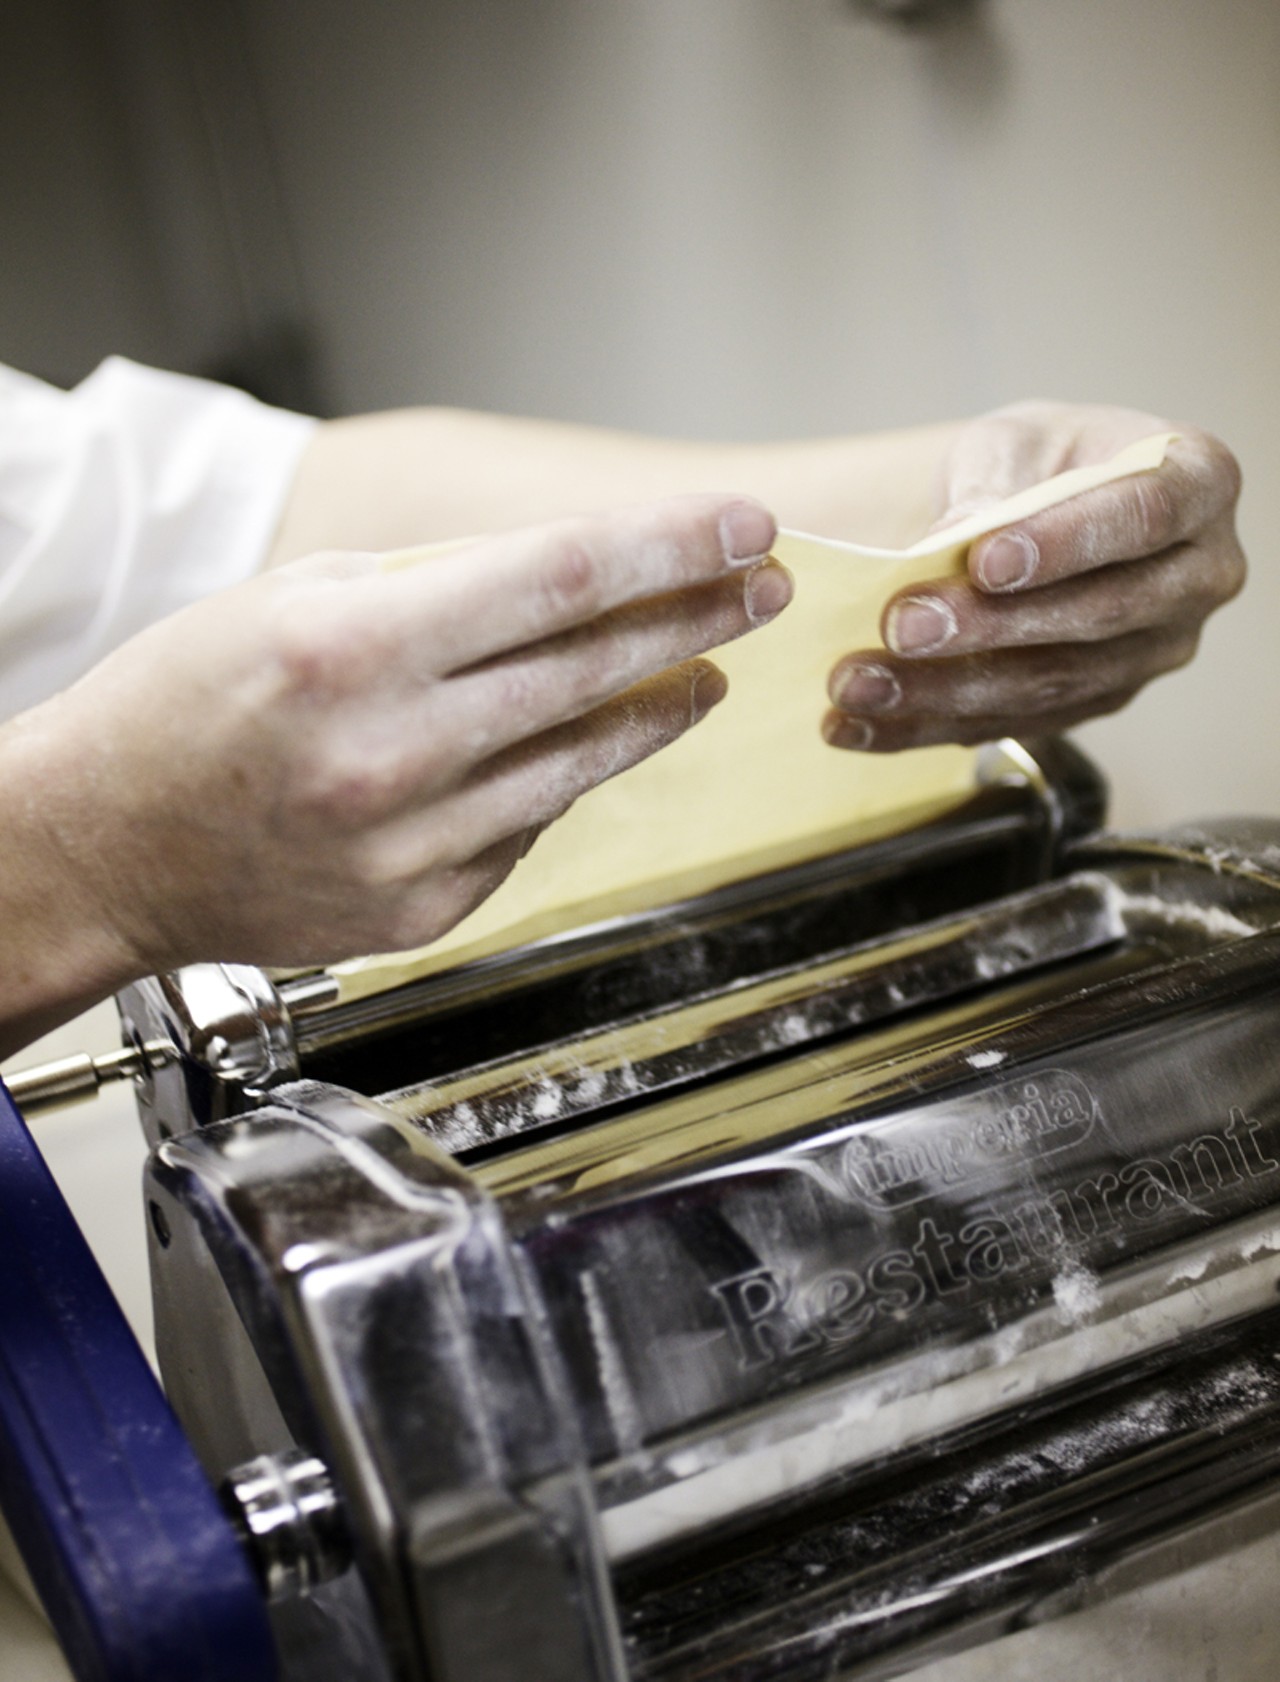 The pastas are made fresh, in-house, daily.